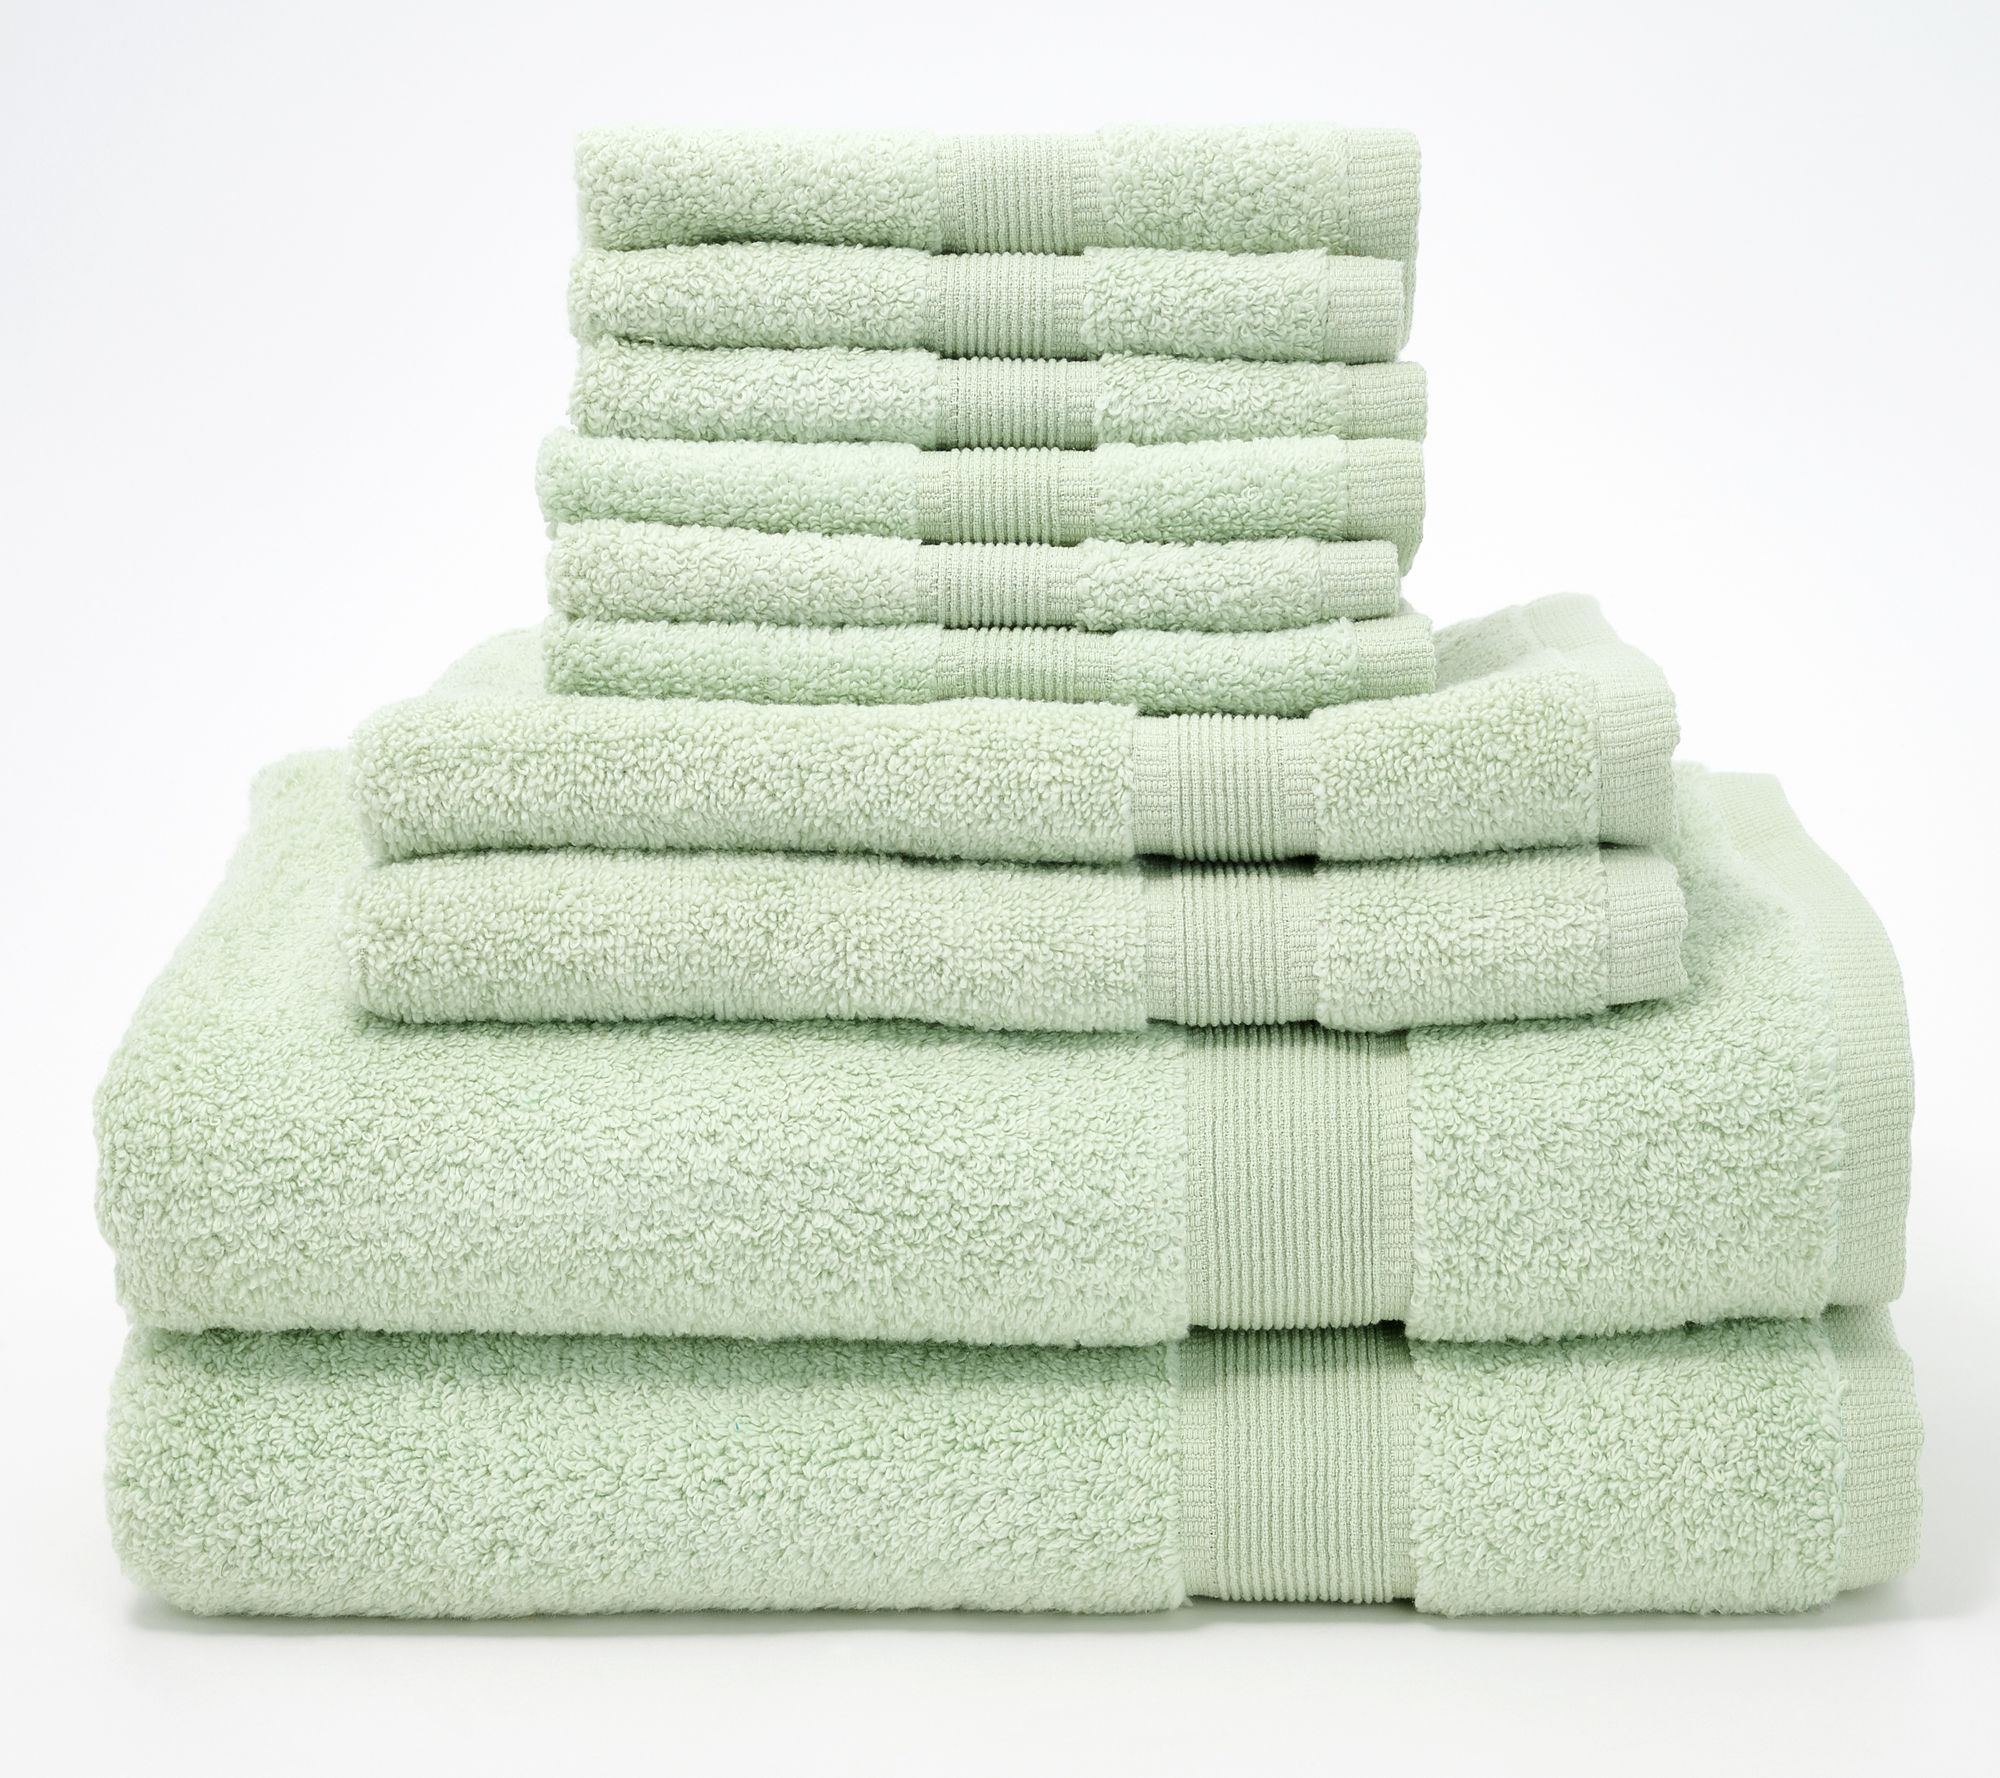 s Best-Selling Bath Towels Are Now 54% Off